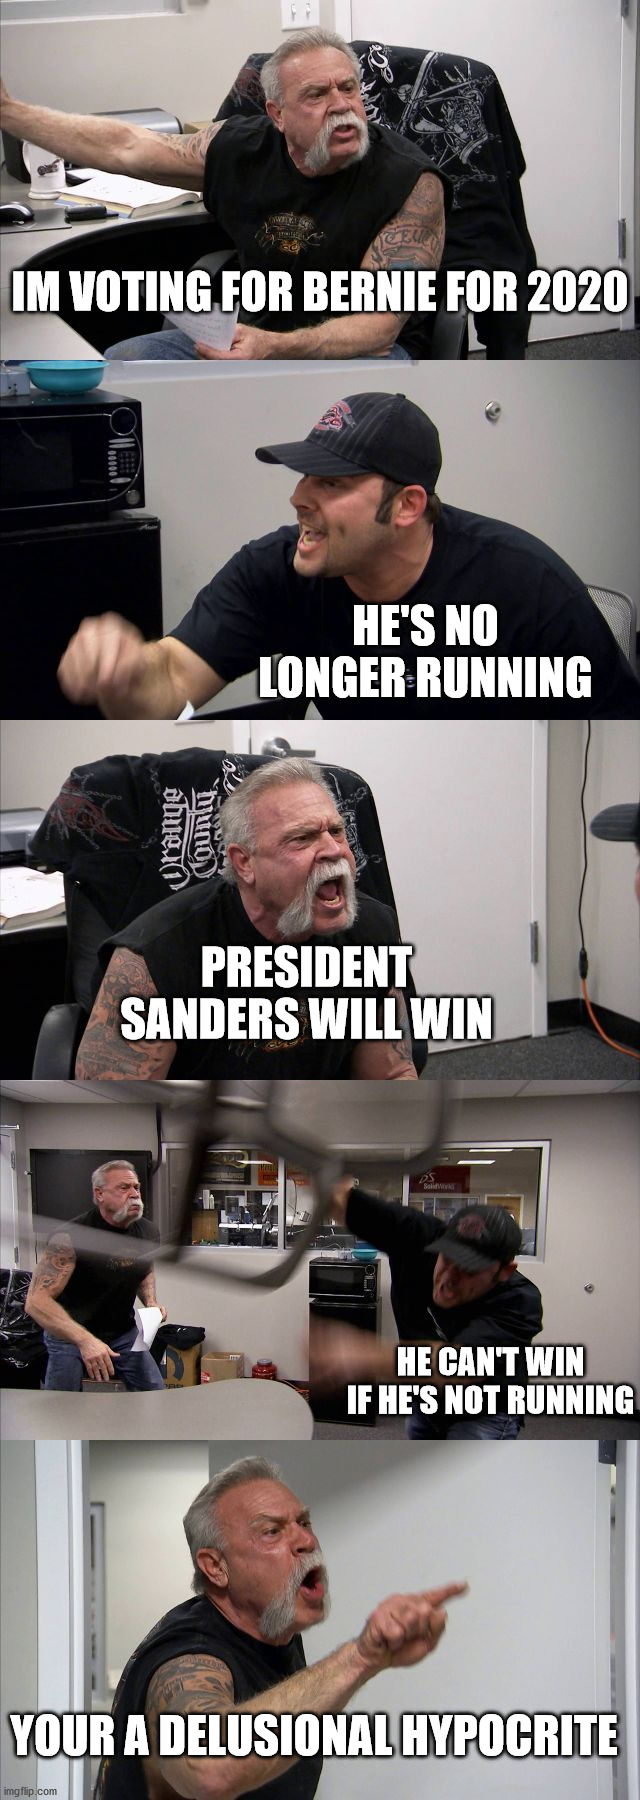 Election 2020 | IM VOTING FOR BERNIE FOR 2020; HE'S NO LONGER RUNNING; PRESIDENT SANDERS WILL WIN; HE CAN'T WIN IF HE'S NOT RUNNING; YOUR A DELUSIONAL HYPOCRITE | image tagged in memes,american chopper argument | made w/ Imgflip meme maker